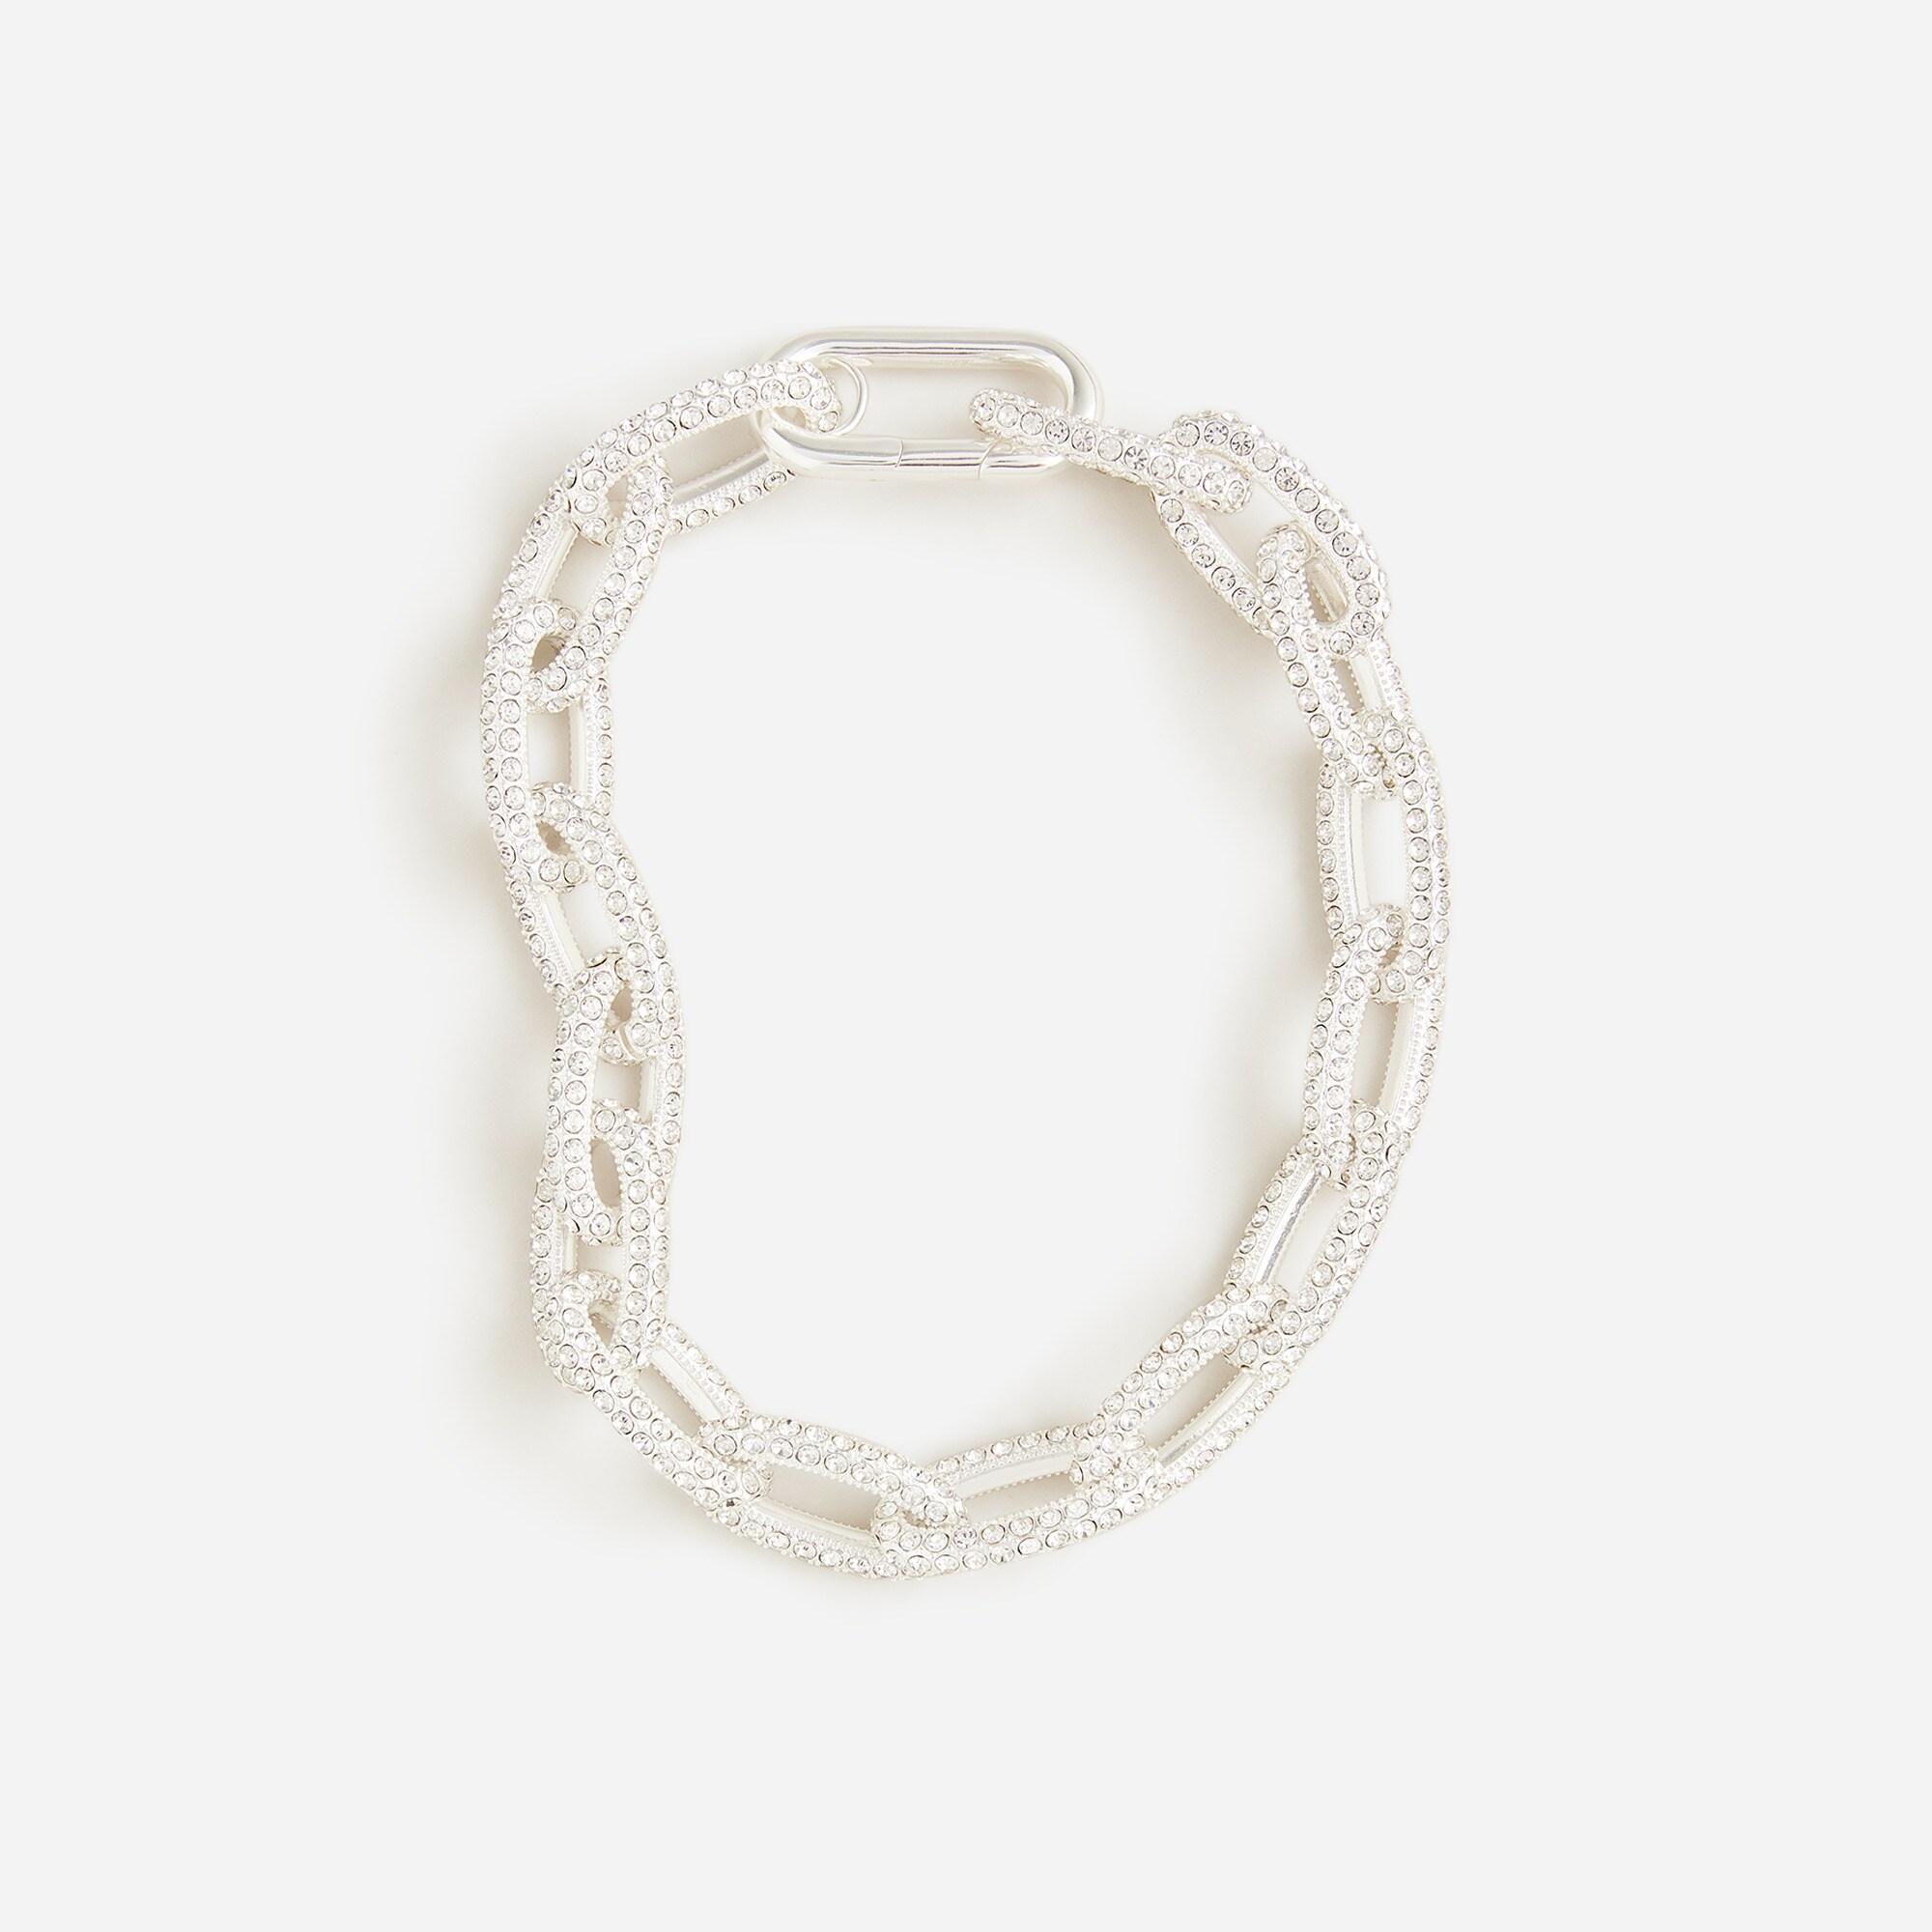  Chainlink necklace with pav&eacute; crystals